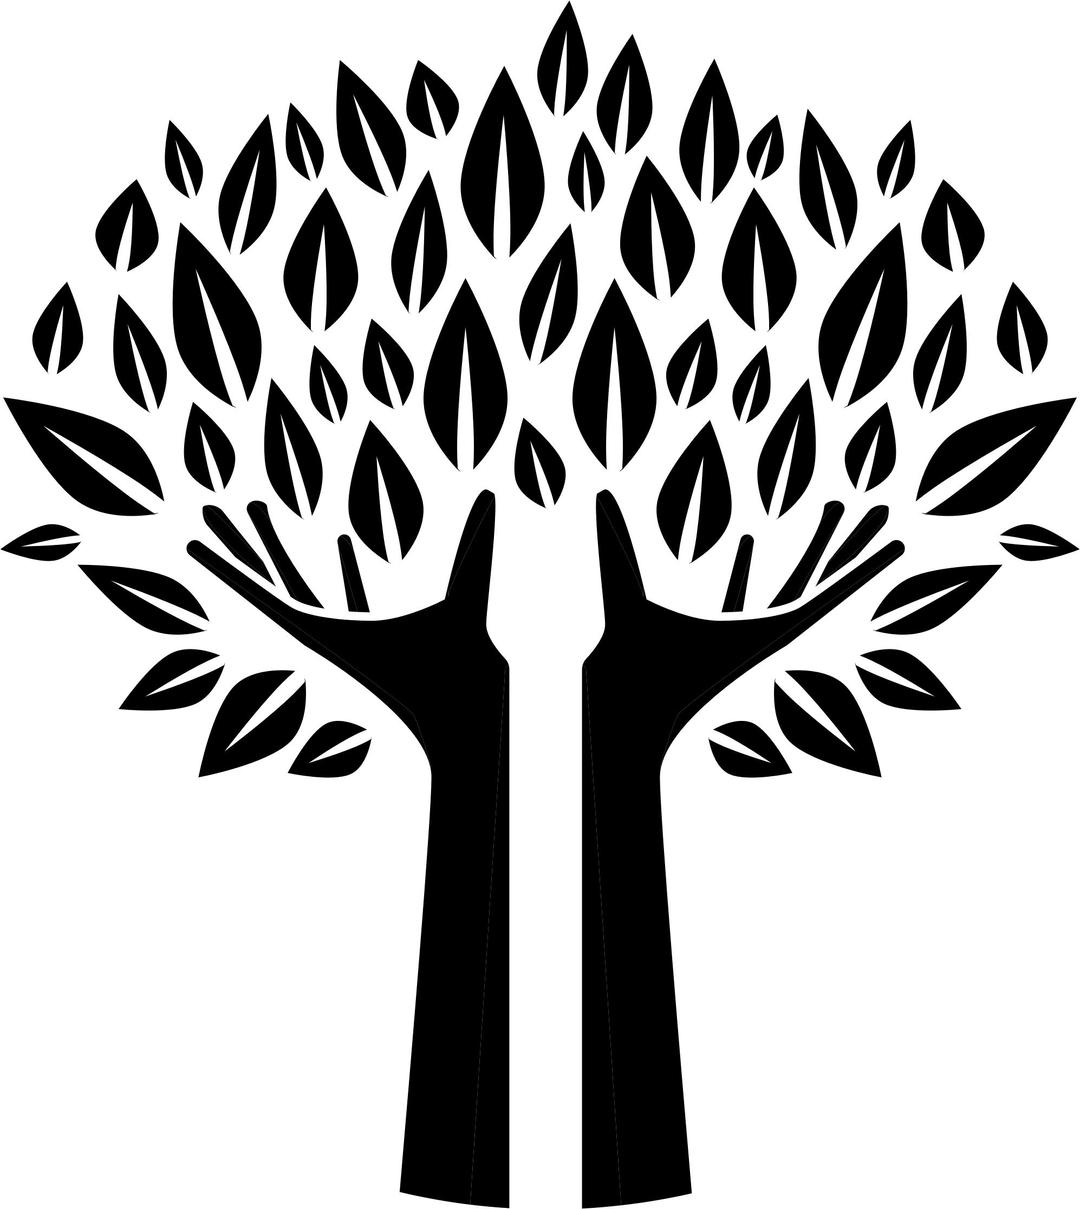 Hands Tree Silhouette png transparent